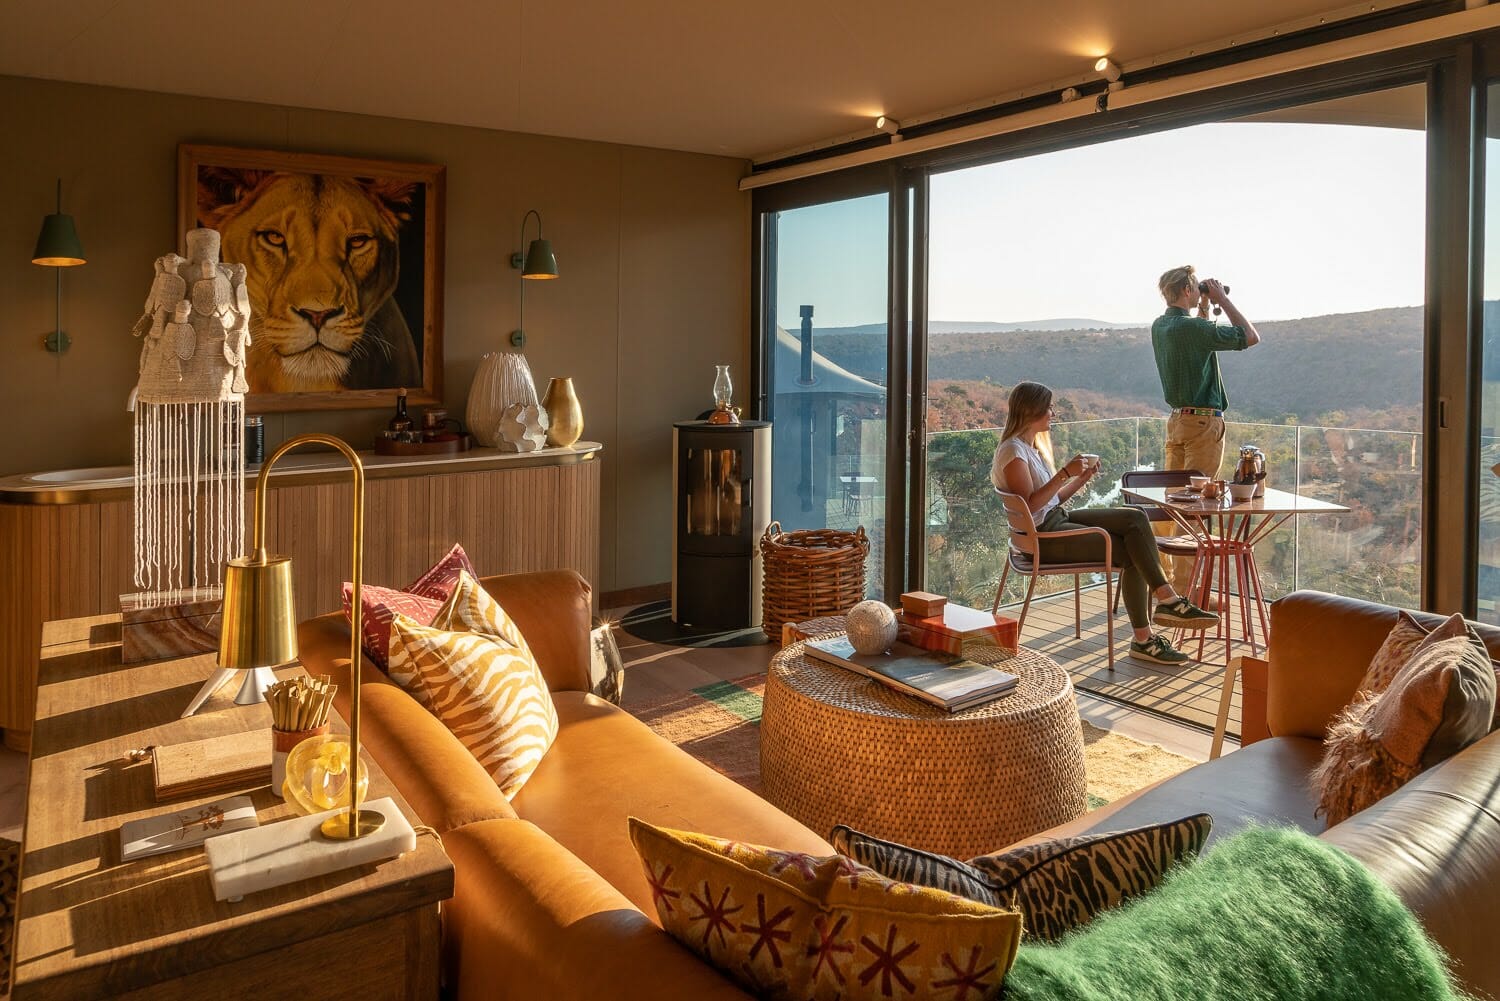 Celebrate World Animal Day with Lepogo Lodges, South Africa